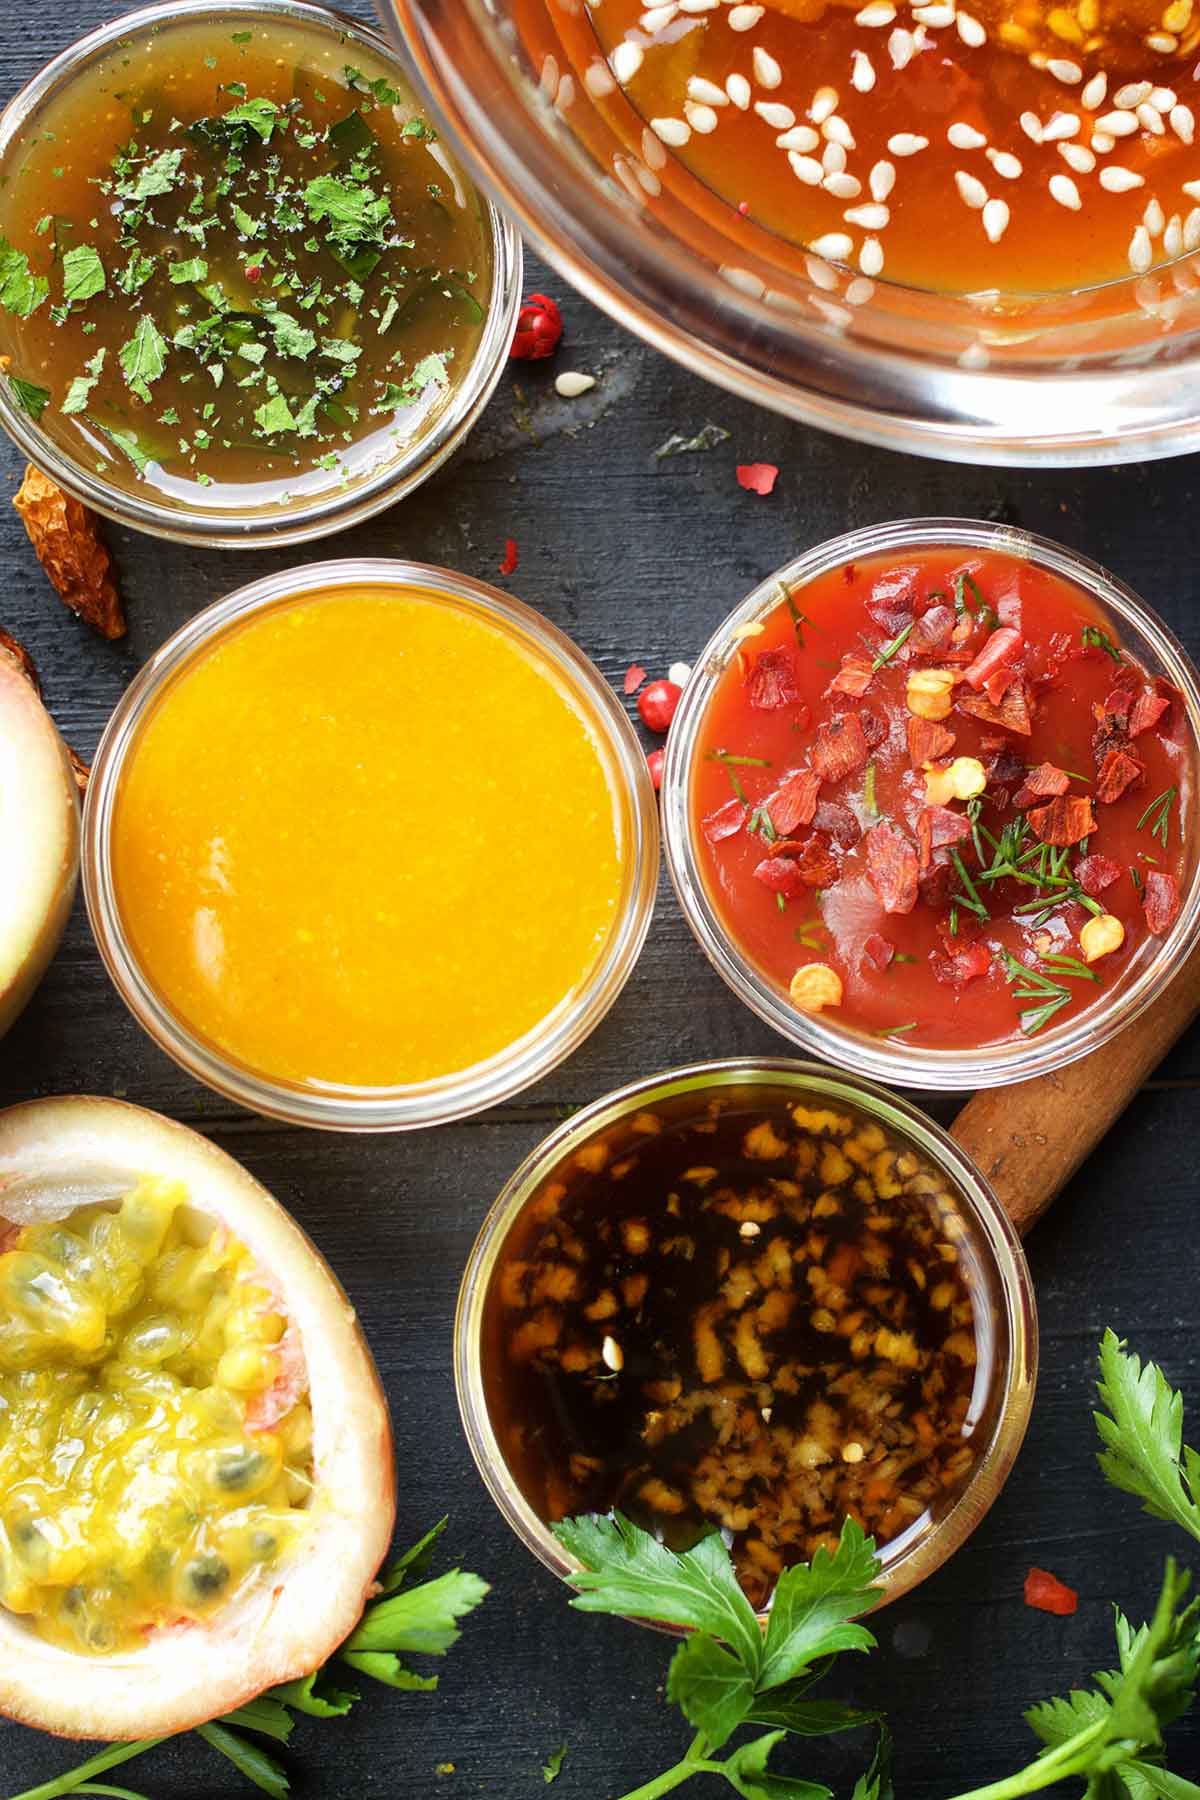 Best Ever Stir-Fry Sauces and Dips